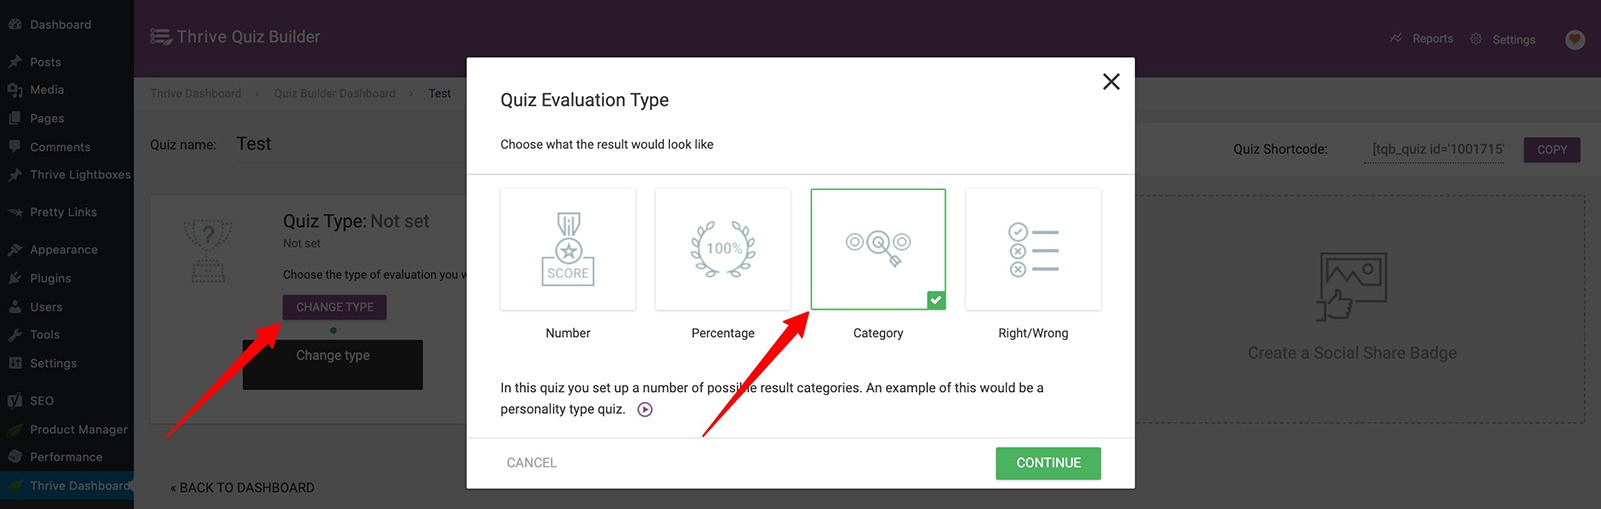 How to select your quiz type in Thrive Quiz Builder